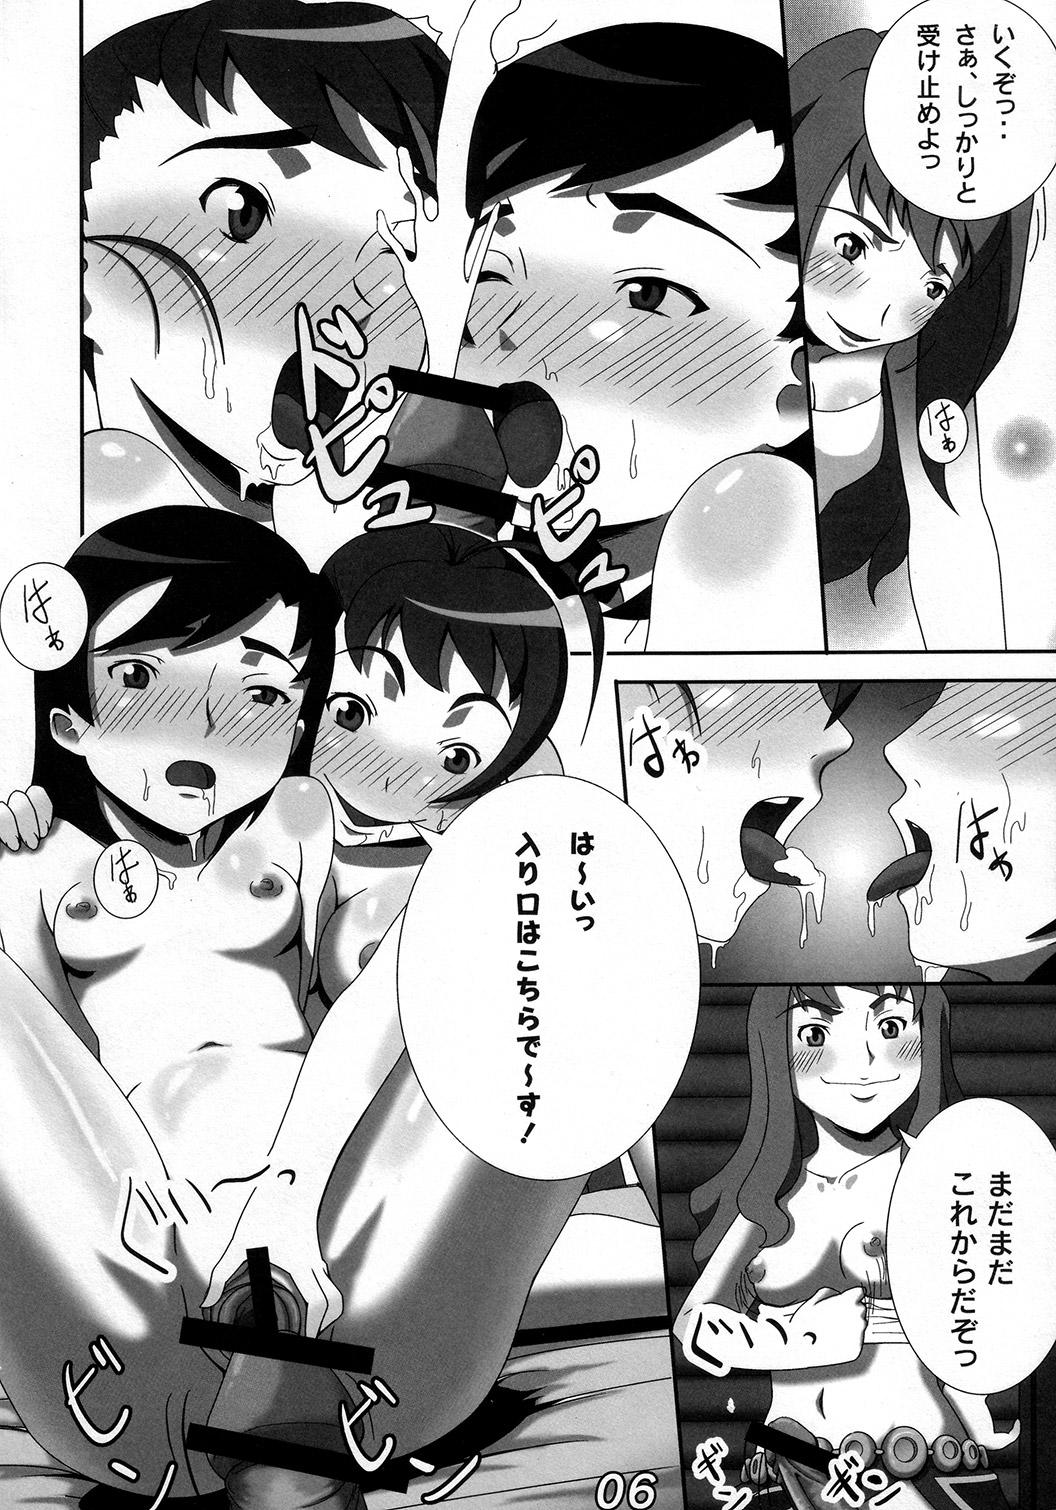 Pussy Otome ☆ Chick - Mai-otome Exposed - Page 5